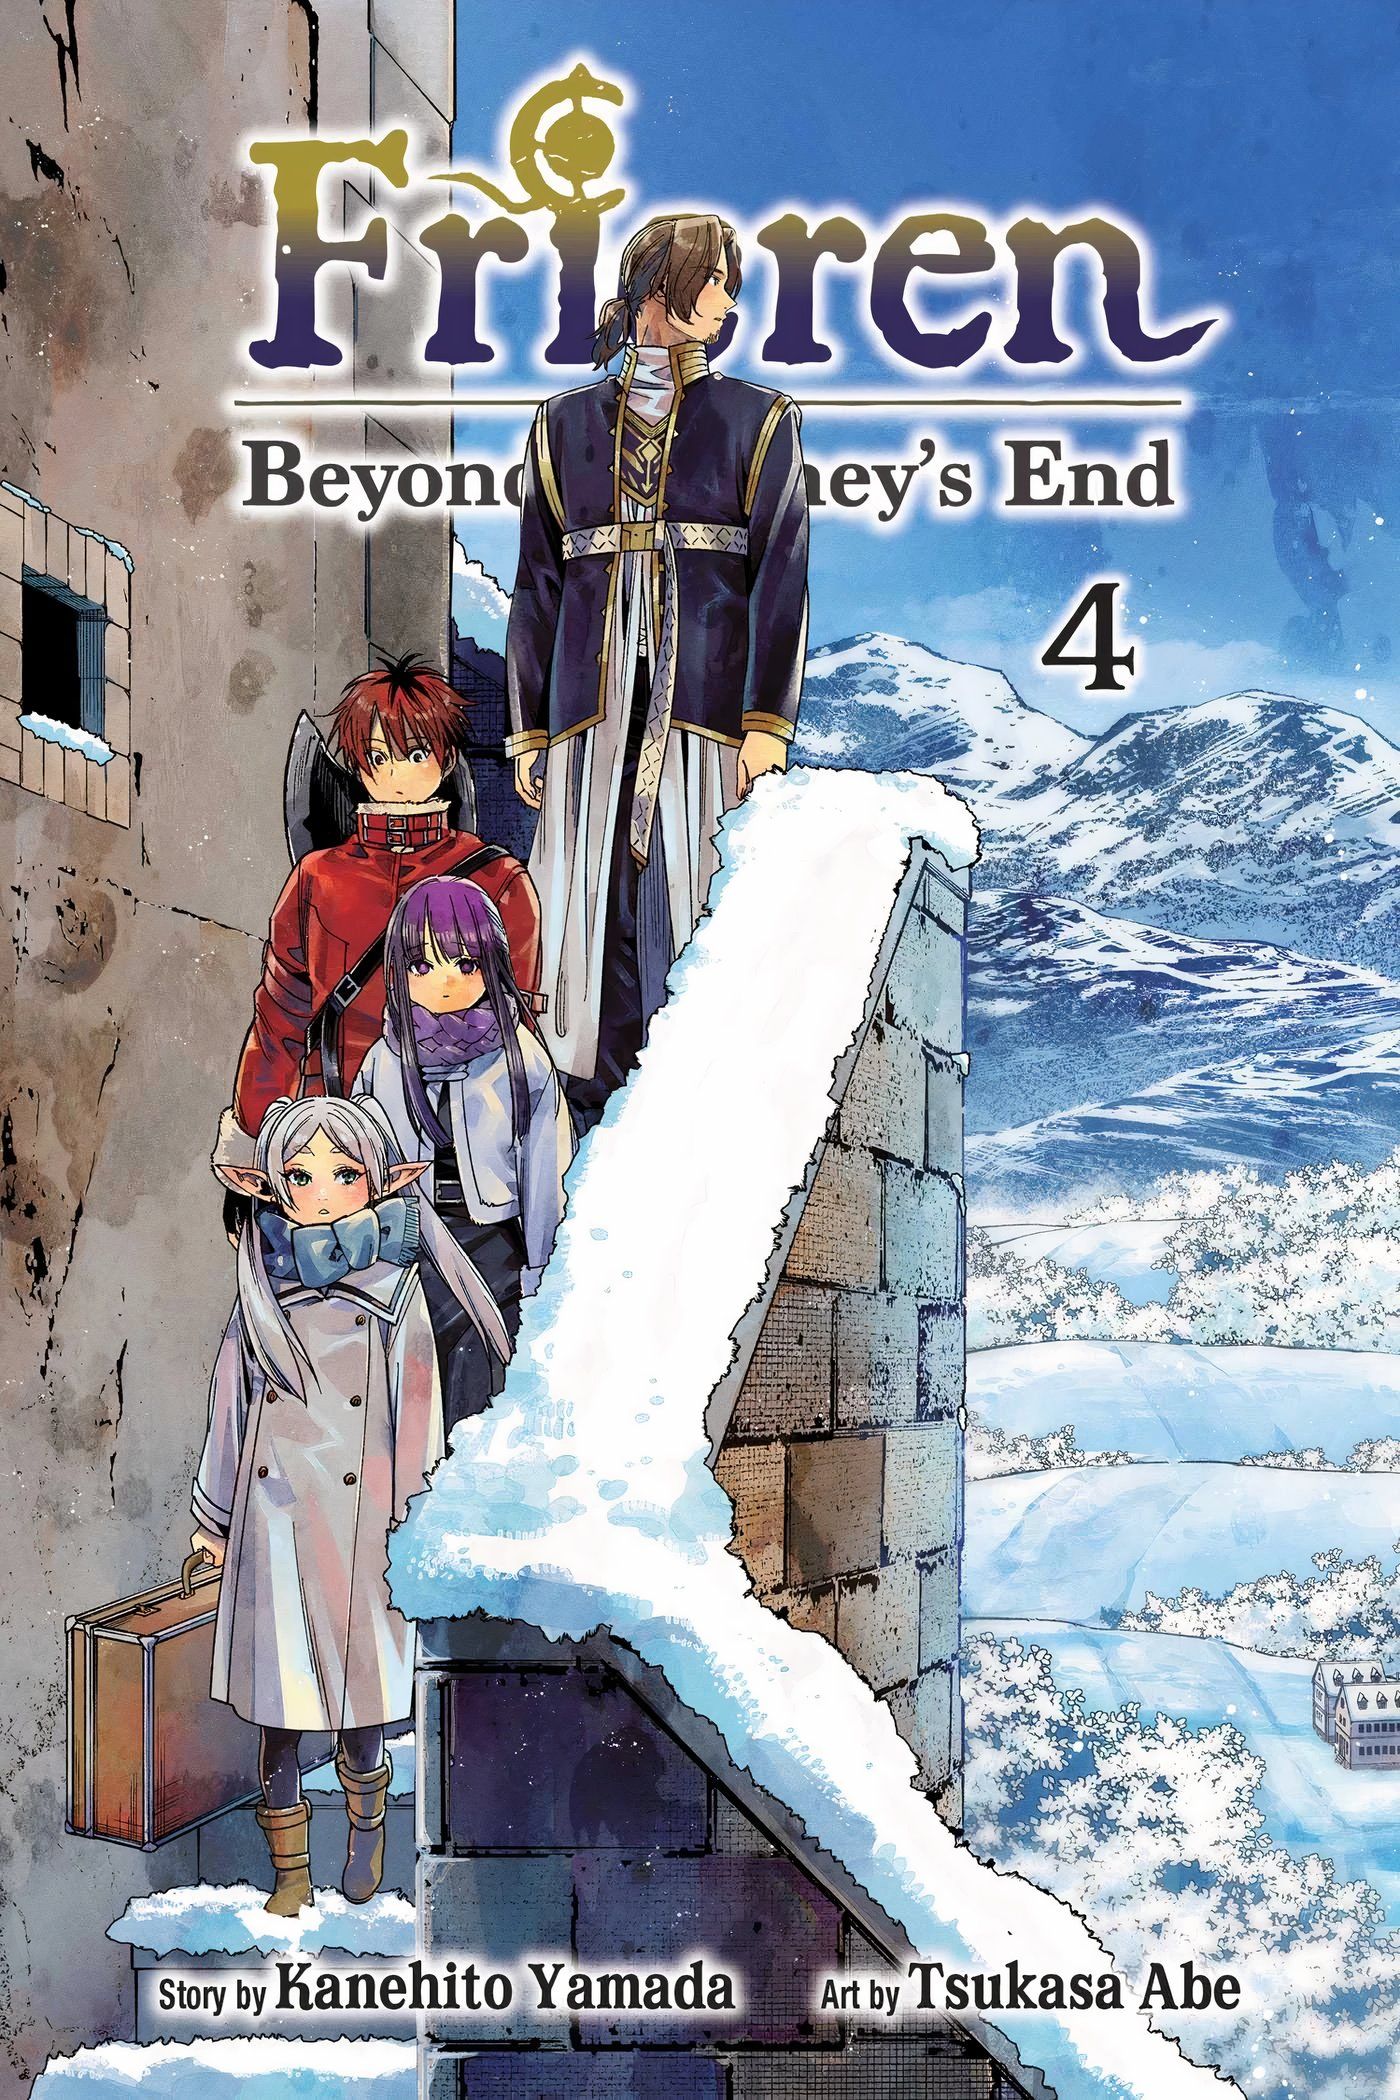 Frieren, Fern, Sein, and Stark descending snowy stairs on the cover of the 4th volume of Frieren